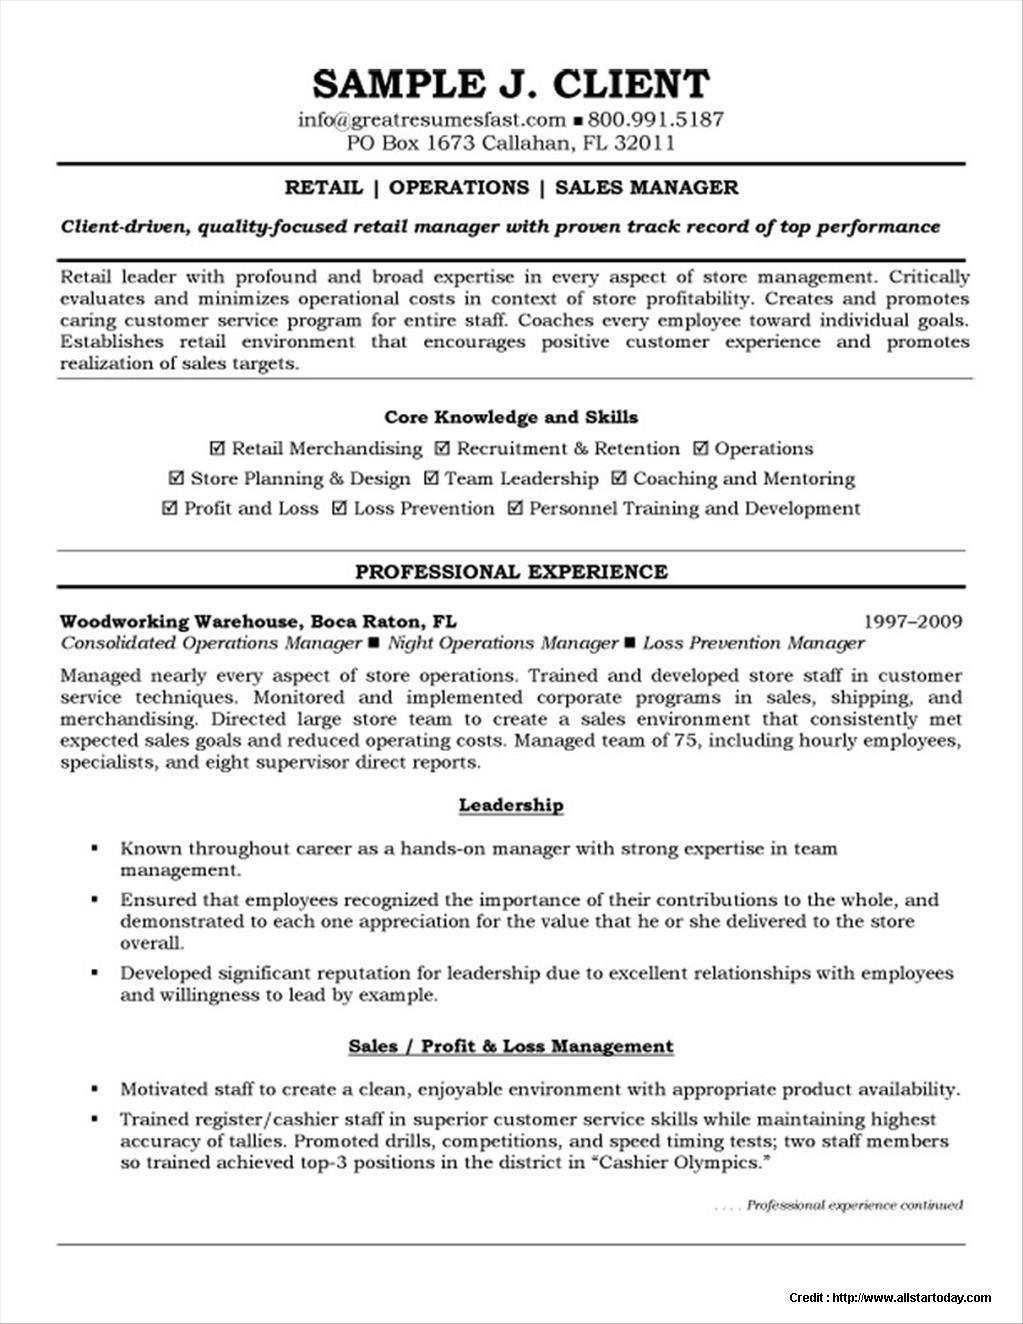 Sample Resume for Retail Management Position Warehouse Resume Template Free 2019 Warehouse Manager Resume …